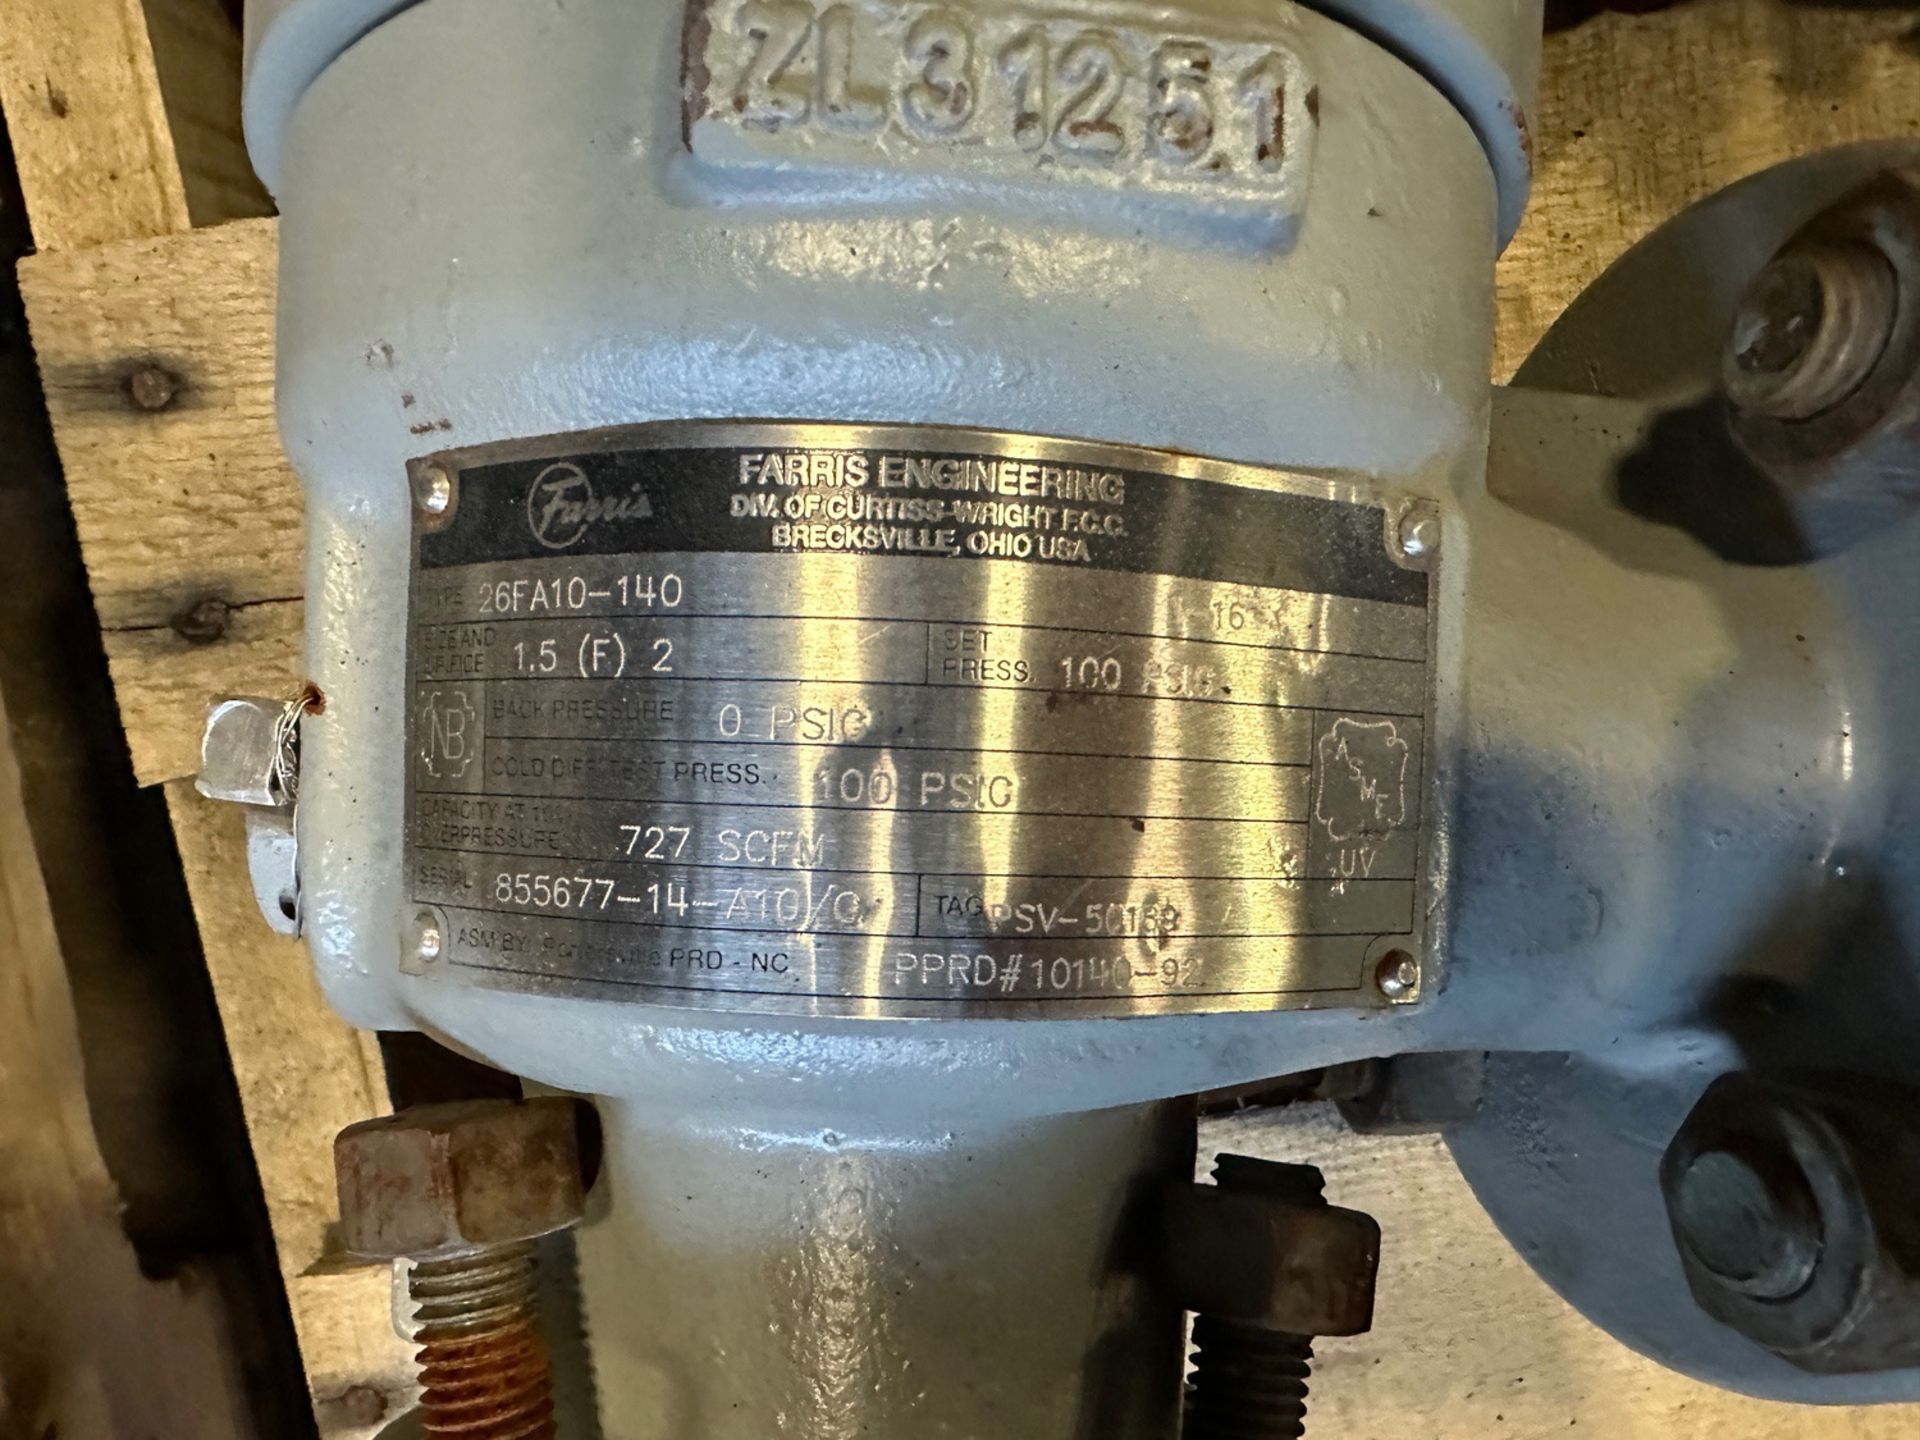 Lot of Pallet of Farris BalanSeal Pressure Relief Valves | Rig Fee $25 - Image 3 of 8